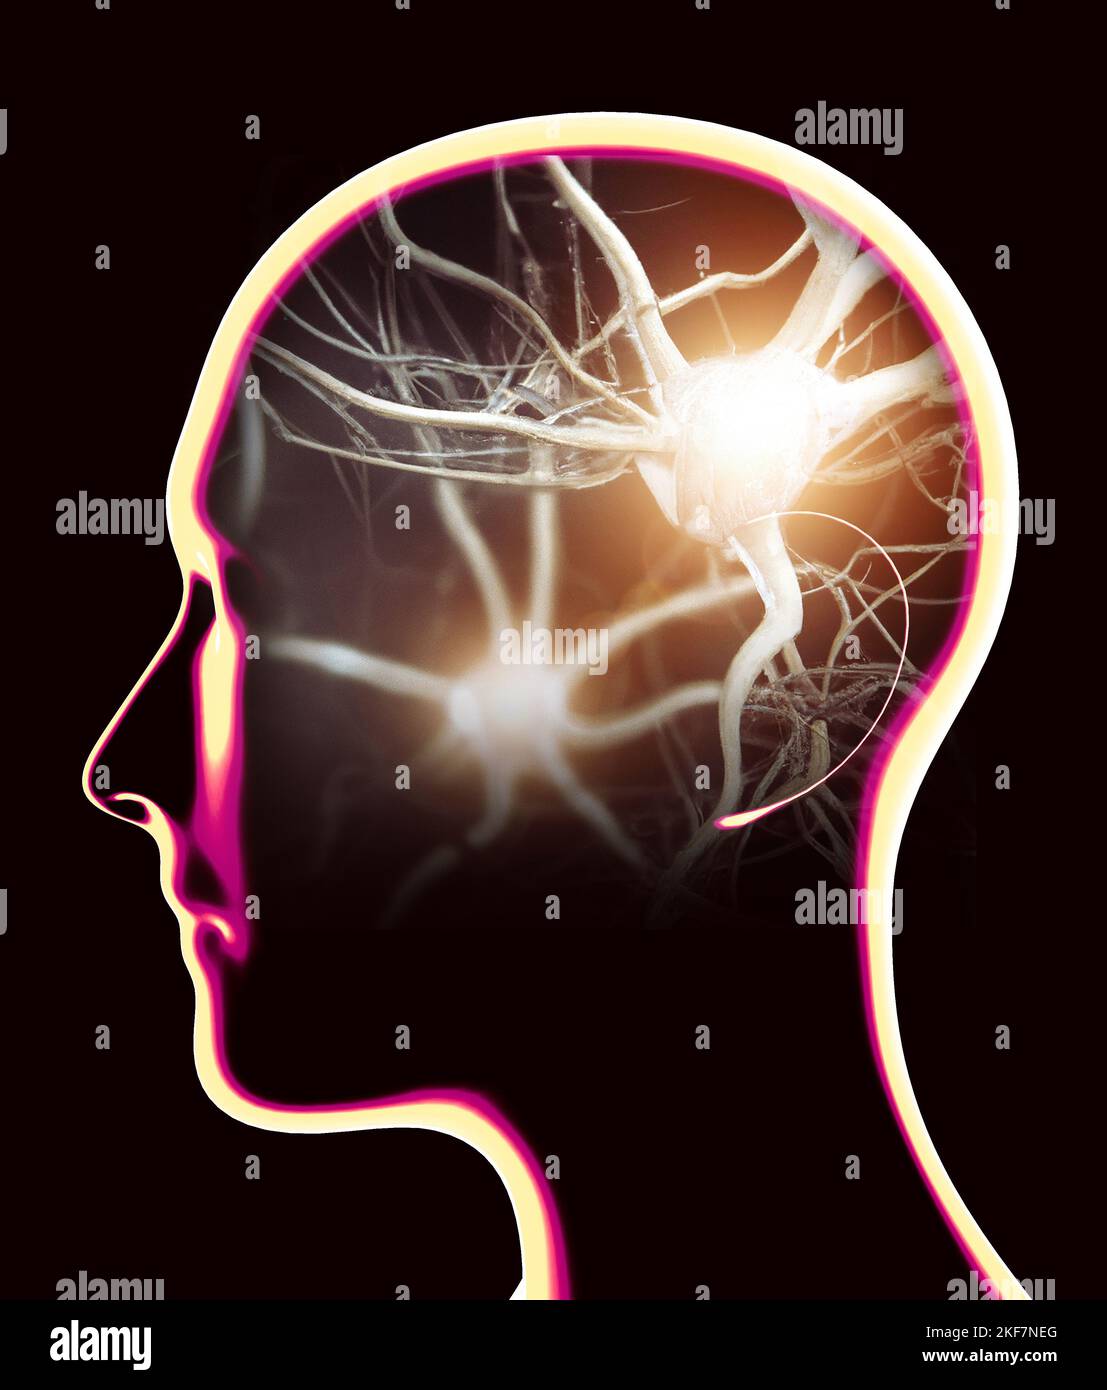 Section of a brain seen in profile. Degenerative diseases, Parkinson, synapses, neurons, Alzheimers.  Silhouette of a man face on a black background Stock Photo